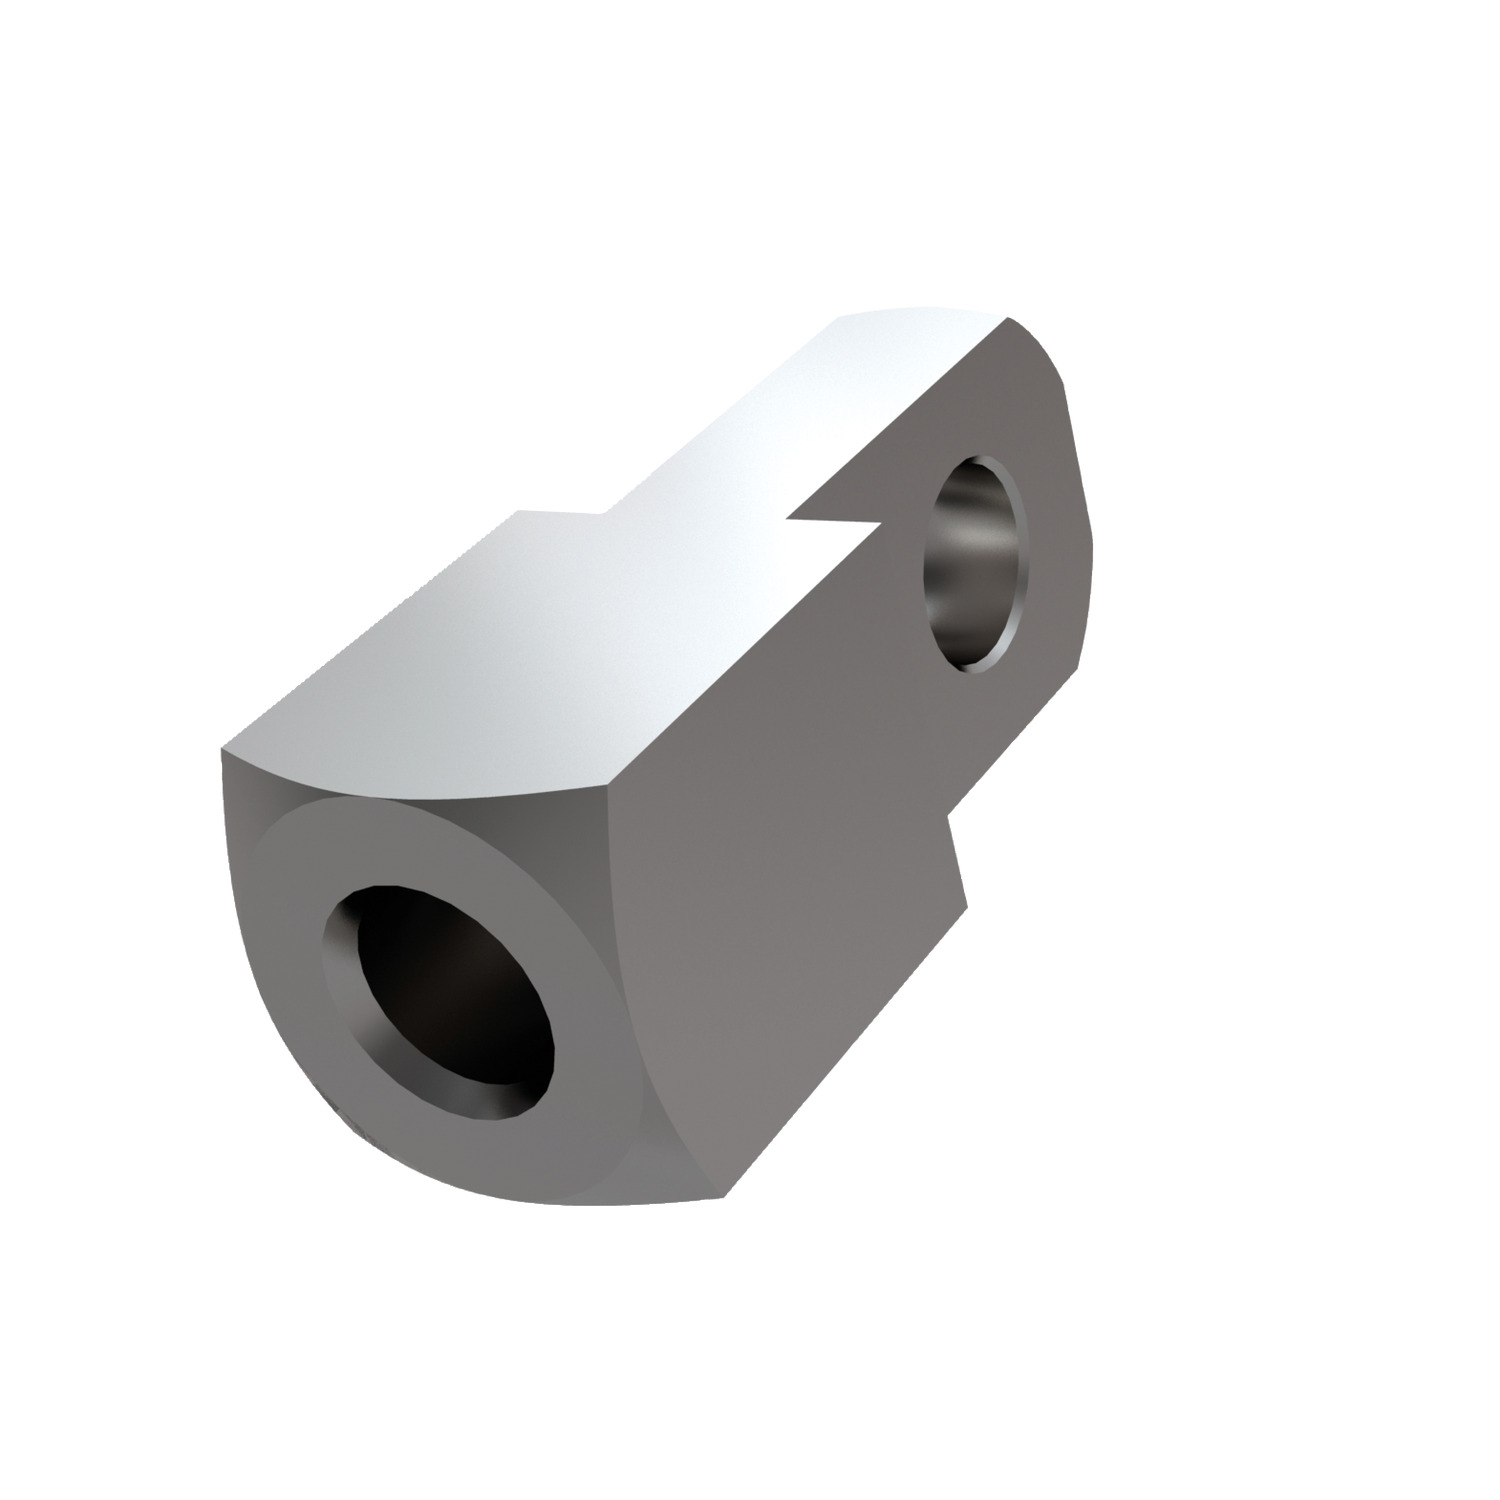 65657.W0010 Mating Piece for Clevis Joints - S/S. Left - Coarse - 10 - 15